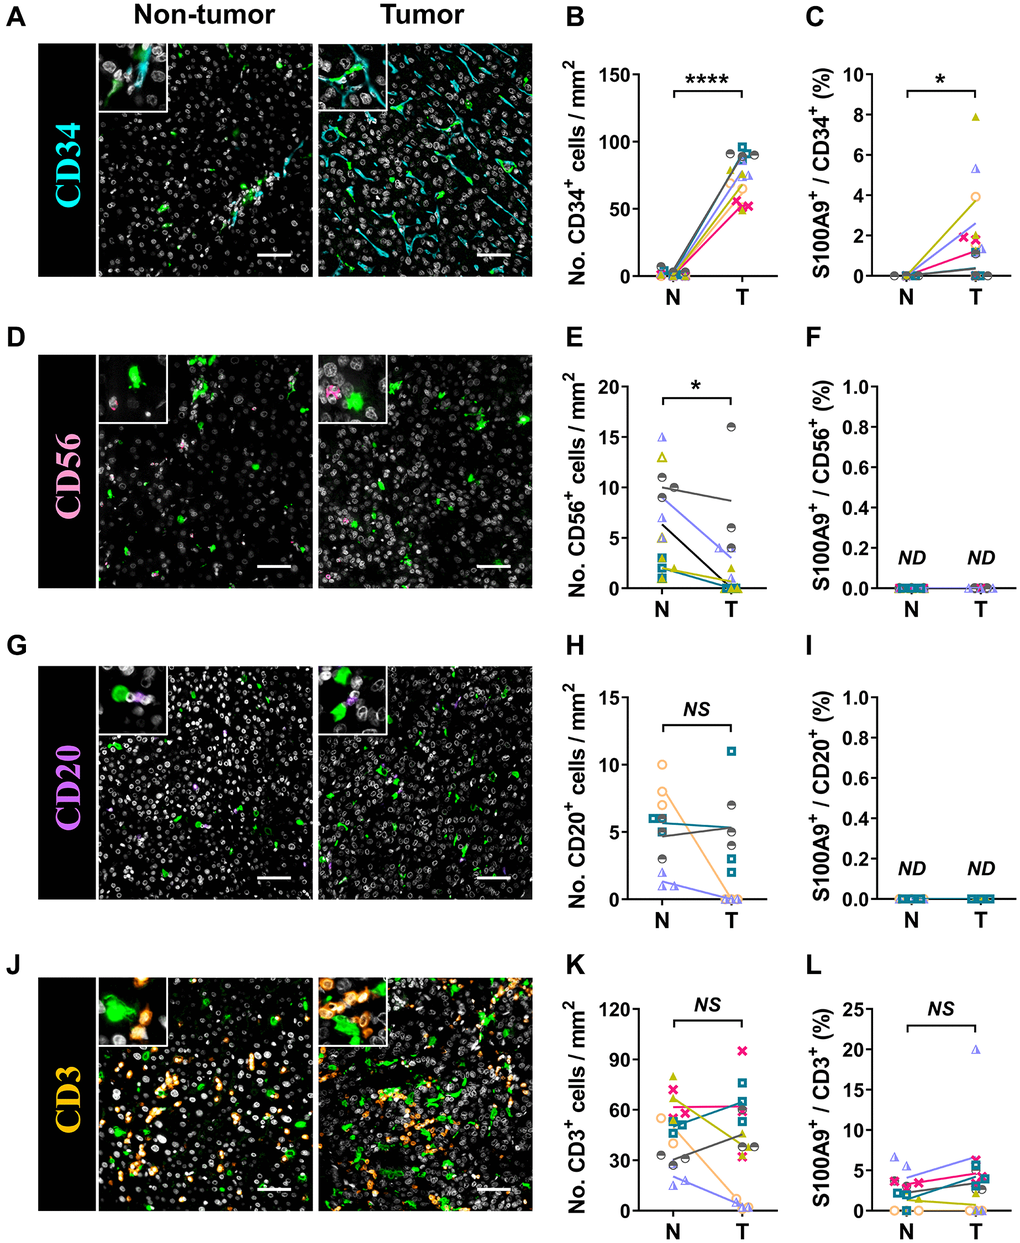 Characterization of patient-derived S100A9+ cells. Multiple immunofluorescence staining shows DAPI (gray), S100A9 (green), CD34 (blue, A), CD56 (pink, D), CD20 (purple, G), and CD3 (orange, J) expression and coexpression (double-positive cells) in HCC tissue. Quantification of CD34 (B), CD56 (E), CD20 (H), and CD3 (K) cell densities in the T and N regions. (C) The percentages of S100A9+CD34+ cells among the total CD34+ cells in the N and T regions. (F) The percentages of S100A9+CD56+ cells among the total CD56+ cells in the N and T regions. (I) The percentages of S100A9+CD20+ cells among the total CD20+ cells in the N and T regions. (L) The percentages of S100A9+CD3+ cells among total CD3+ cells in the N and T regions (n = 4 - 7). Scale bar = 50 μm. The results are the means ± SEM (bars); NS, no significance; ND, not detected.